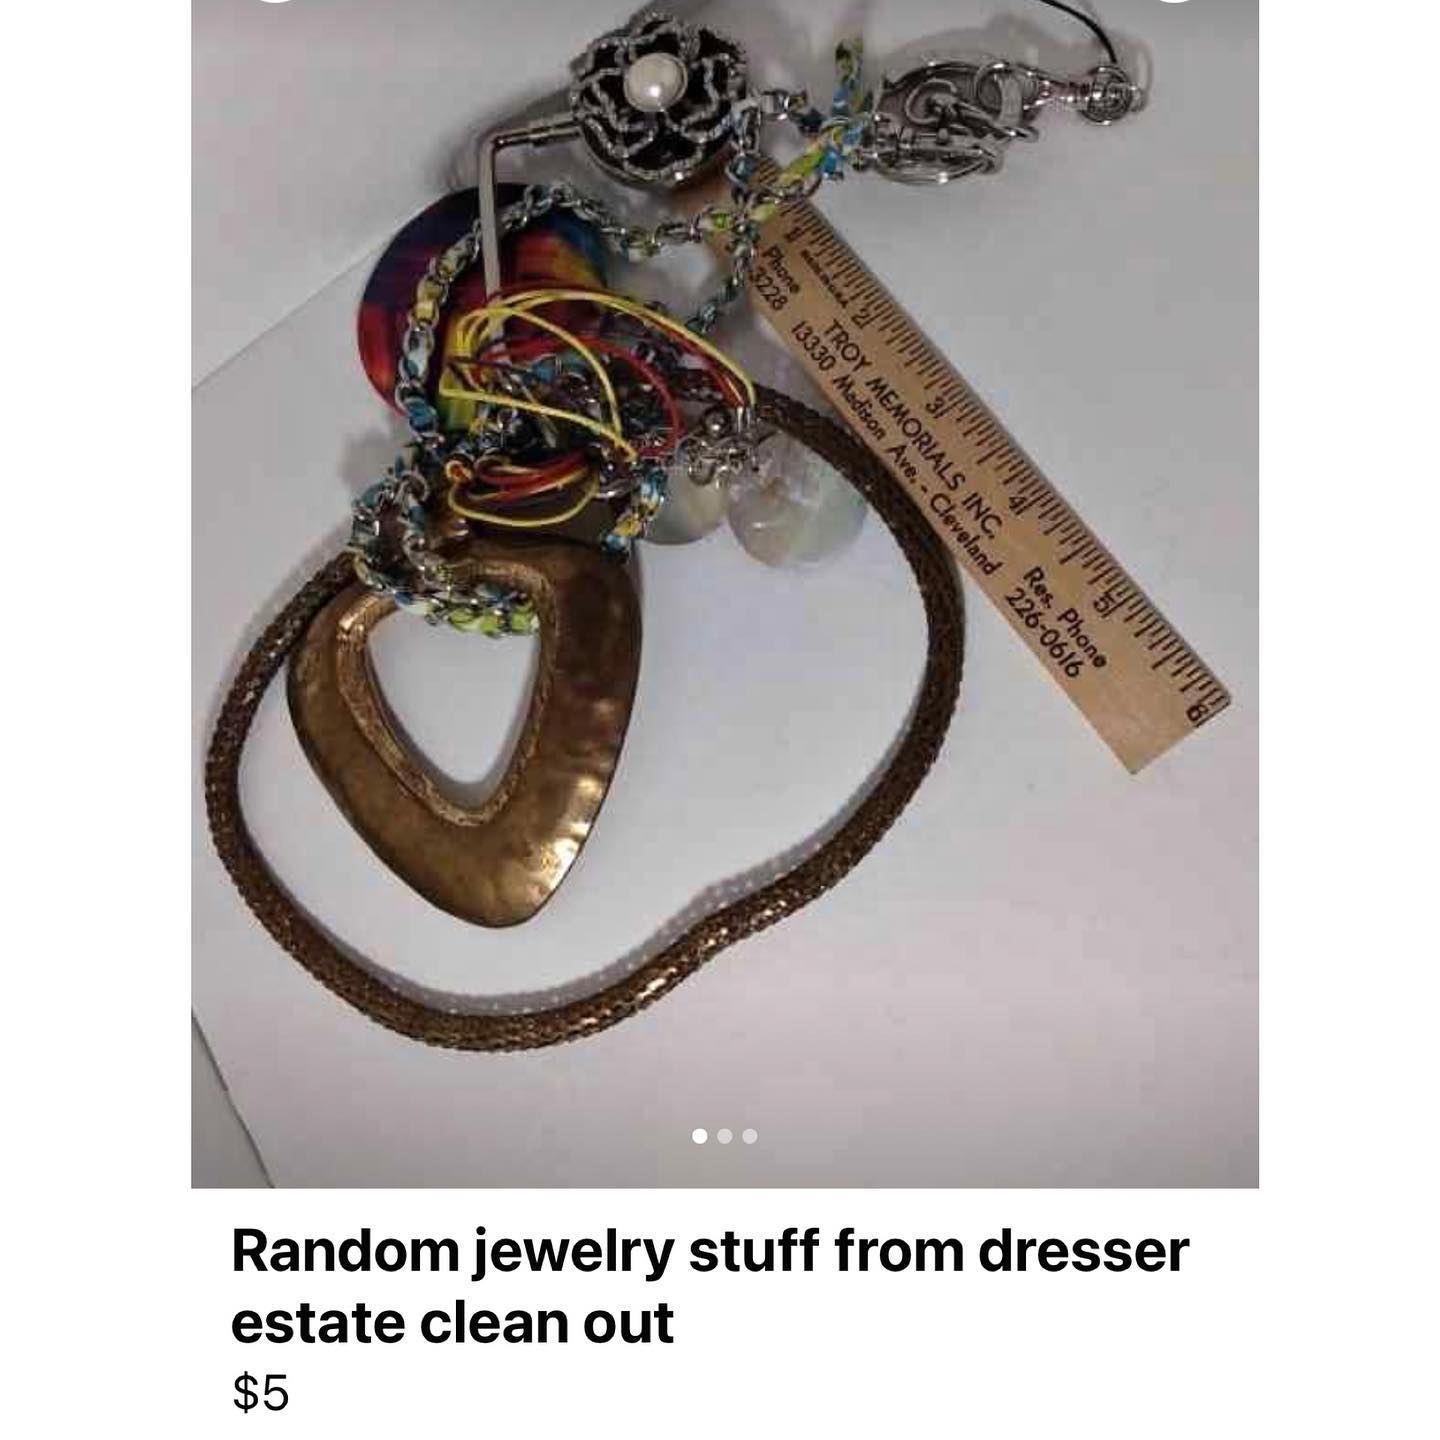 pile of tangled jewelry being sold on Facebook